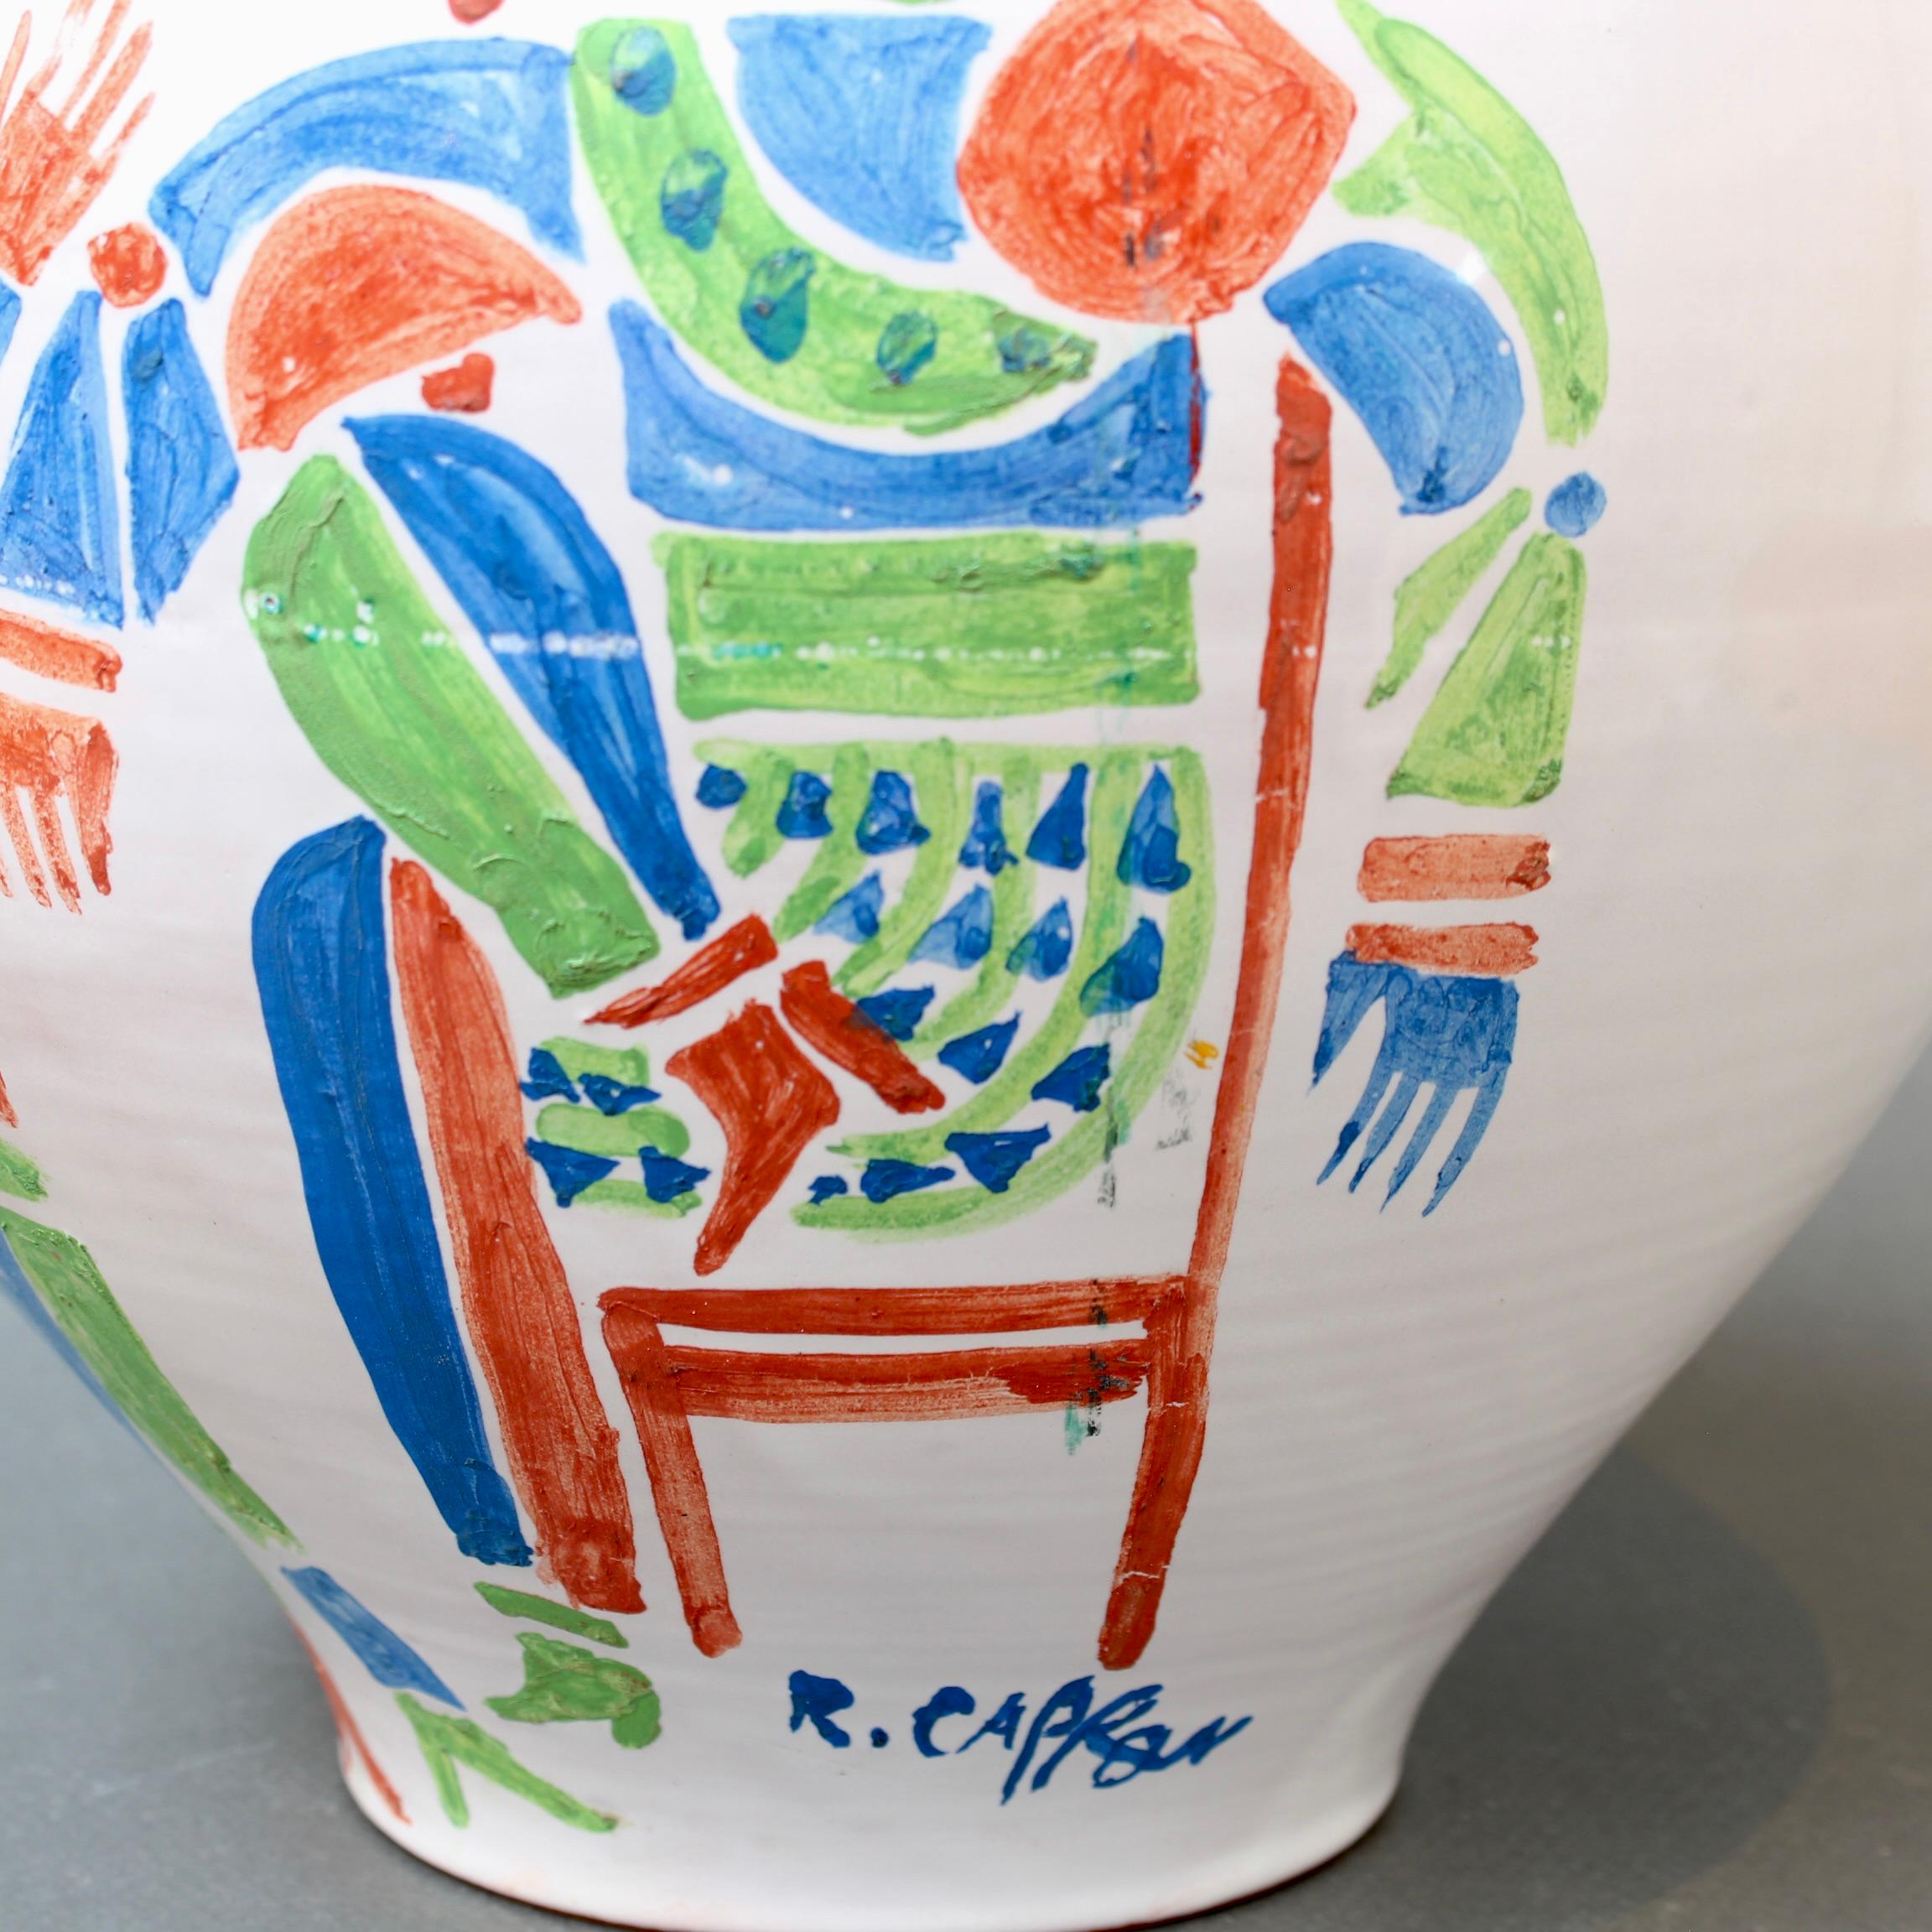 Vintage French Hand-Painted Ceramic Vase by Roger Capron (circa 1960s) For Sale 5